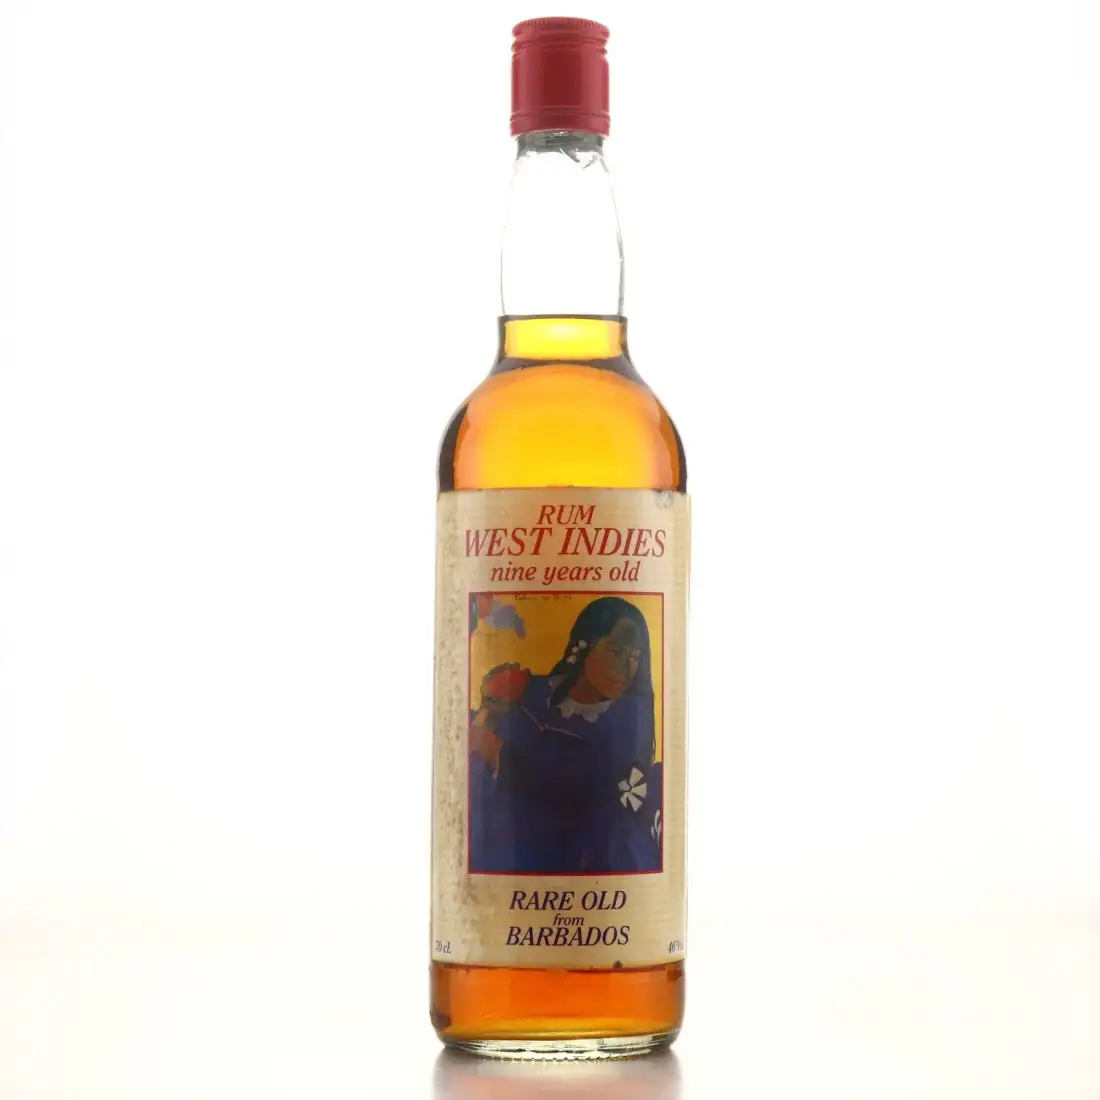 Image of the front of the bottle of the rum Rare Old from Barbados